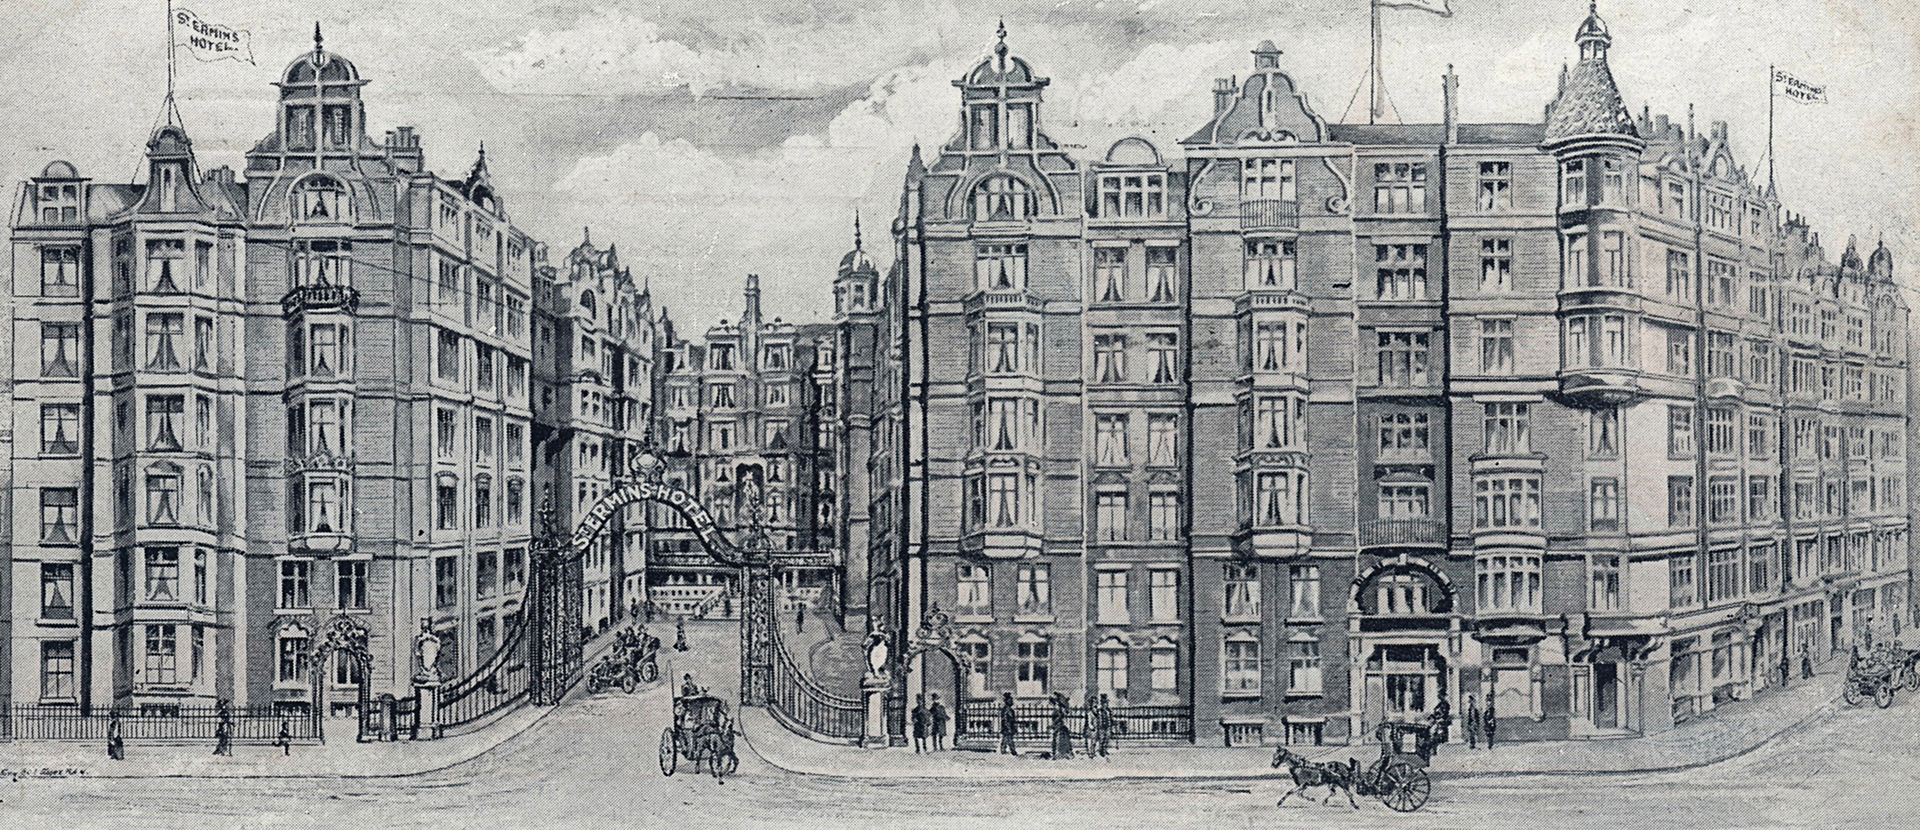 Image of historic exterior of St. Ermin's Hotel in London, England, United Kingdom